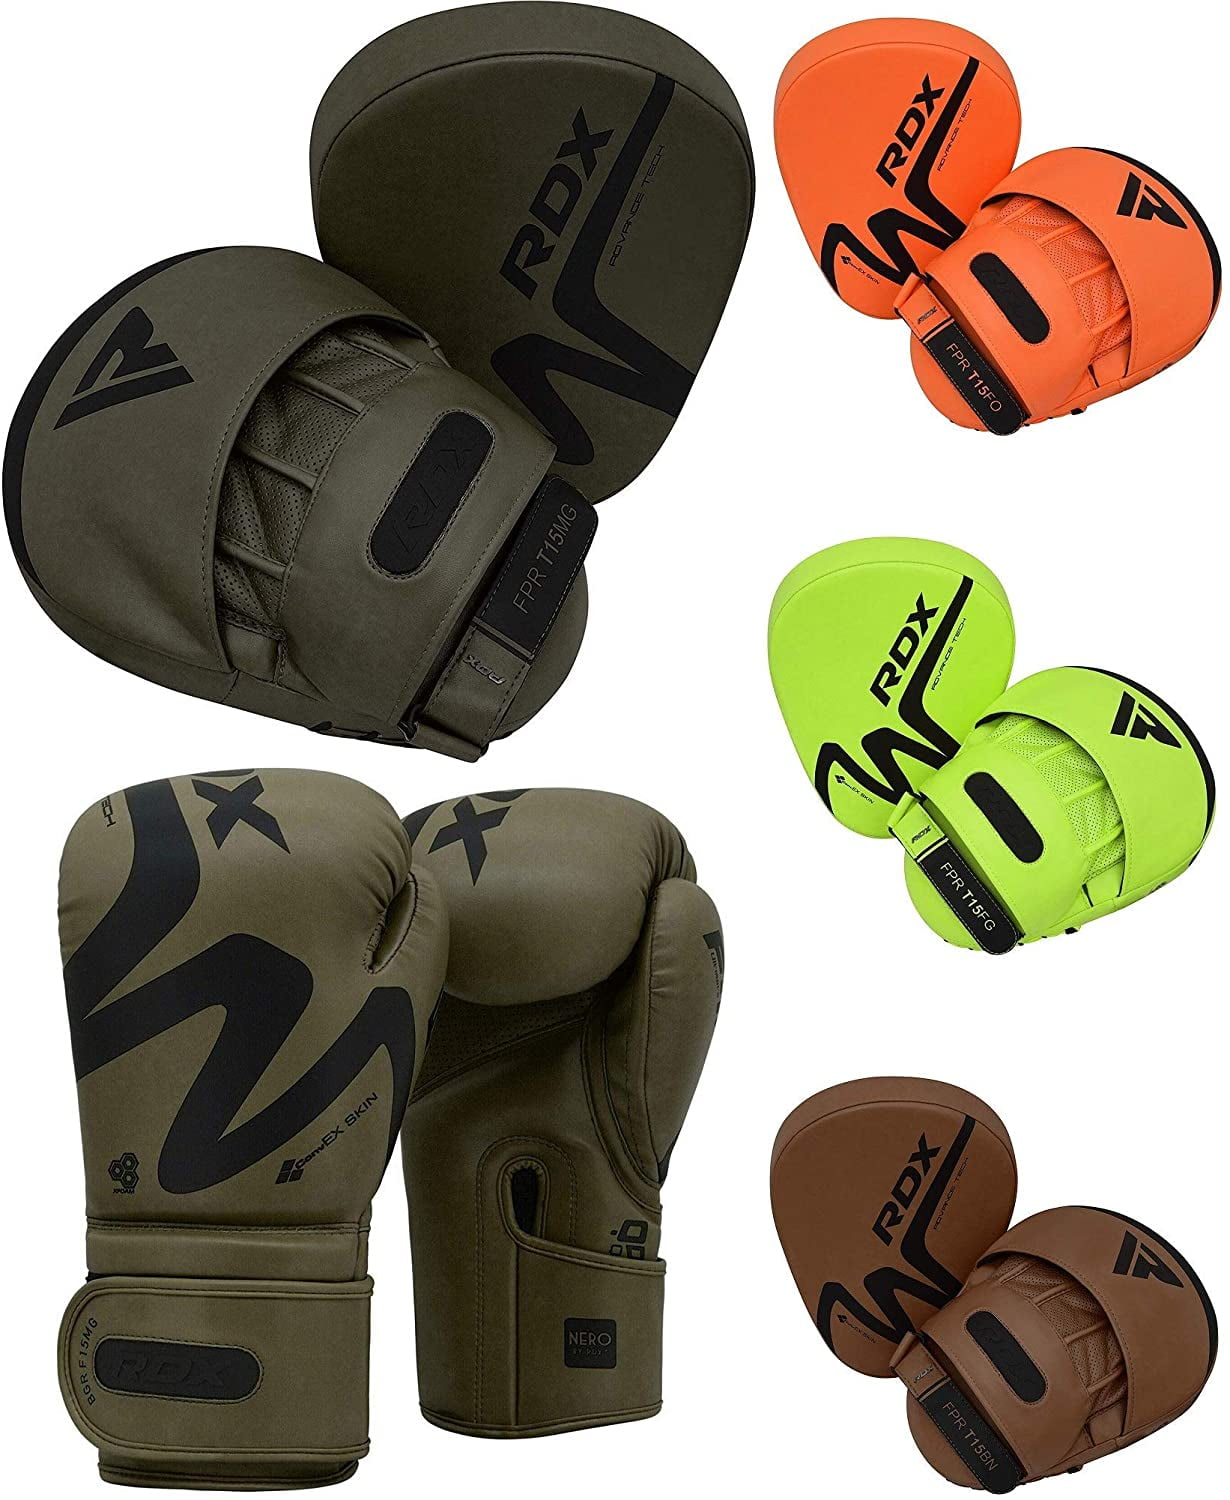 Boxing Focus Pads Hook and Jabs Mitts Gloves Strike Punching Kick Training Mitts 